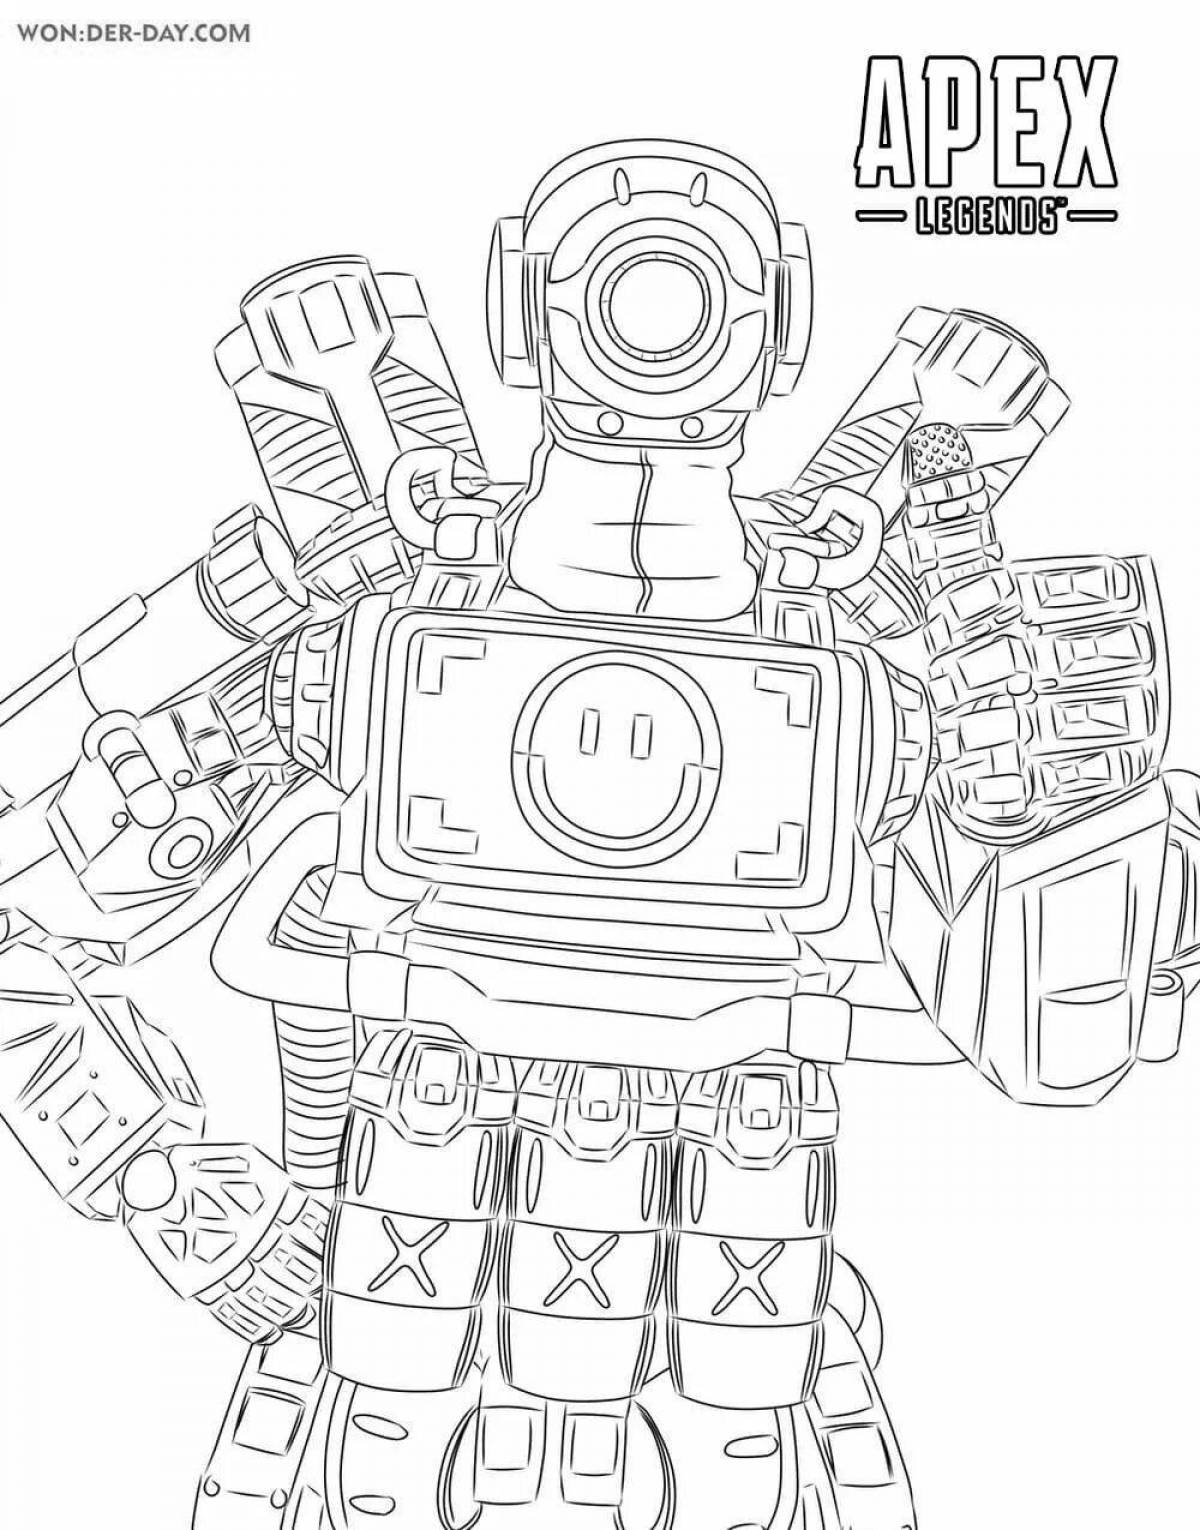 Apex awesome coloring book